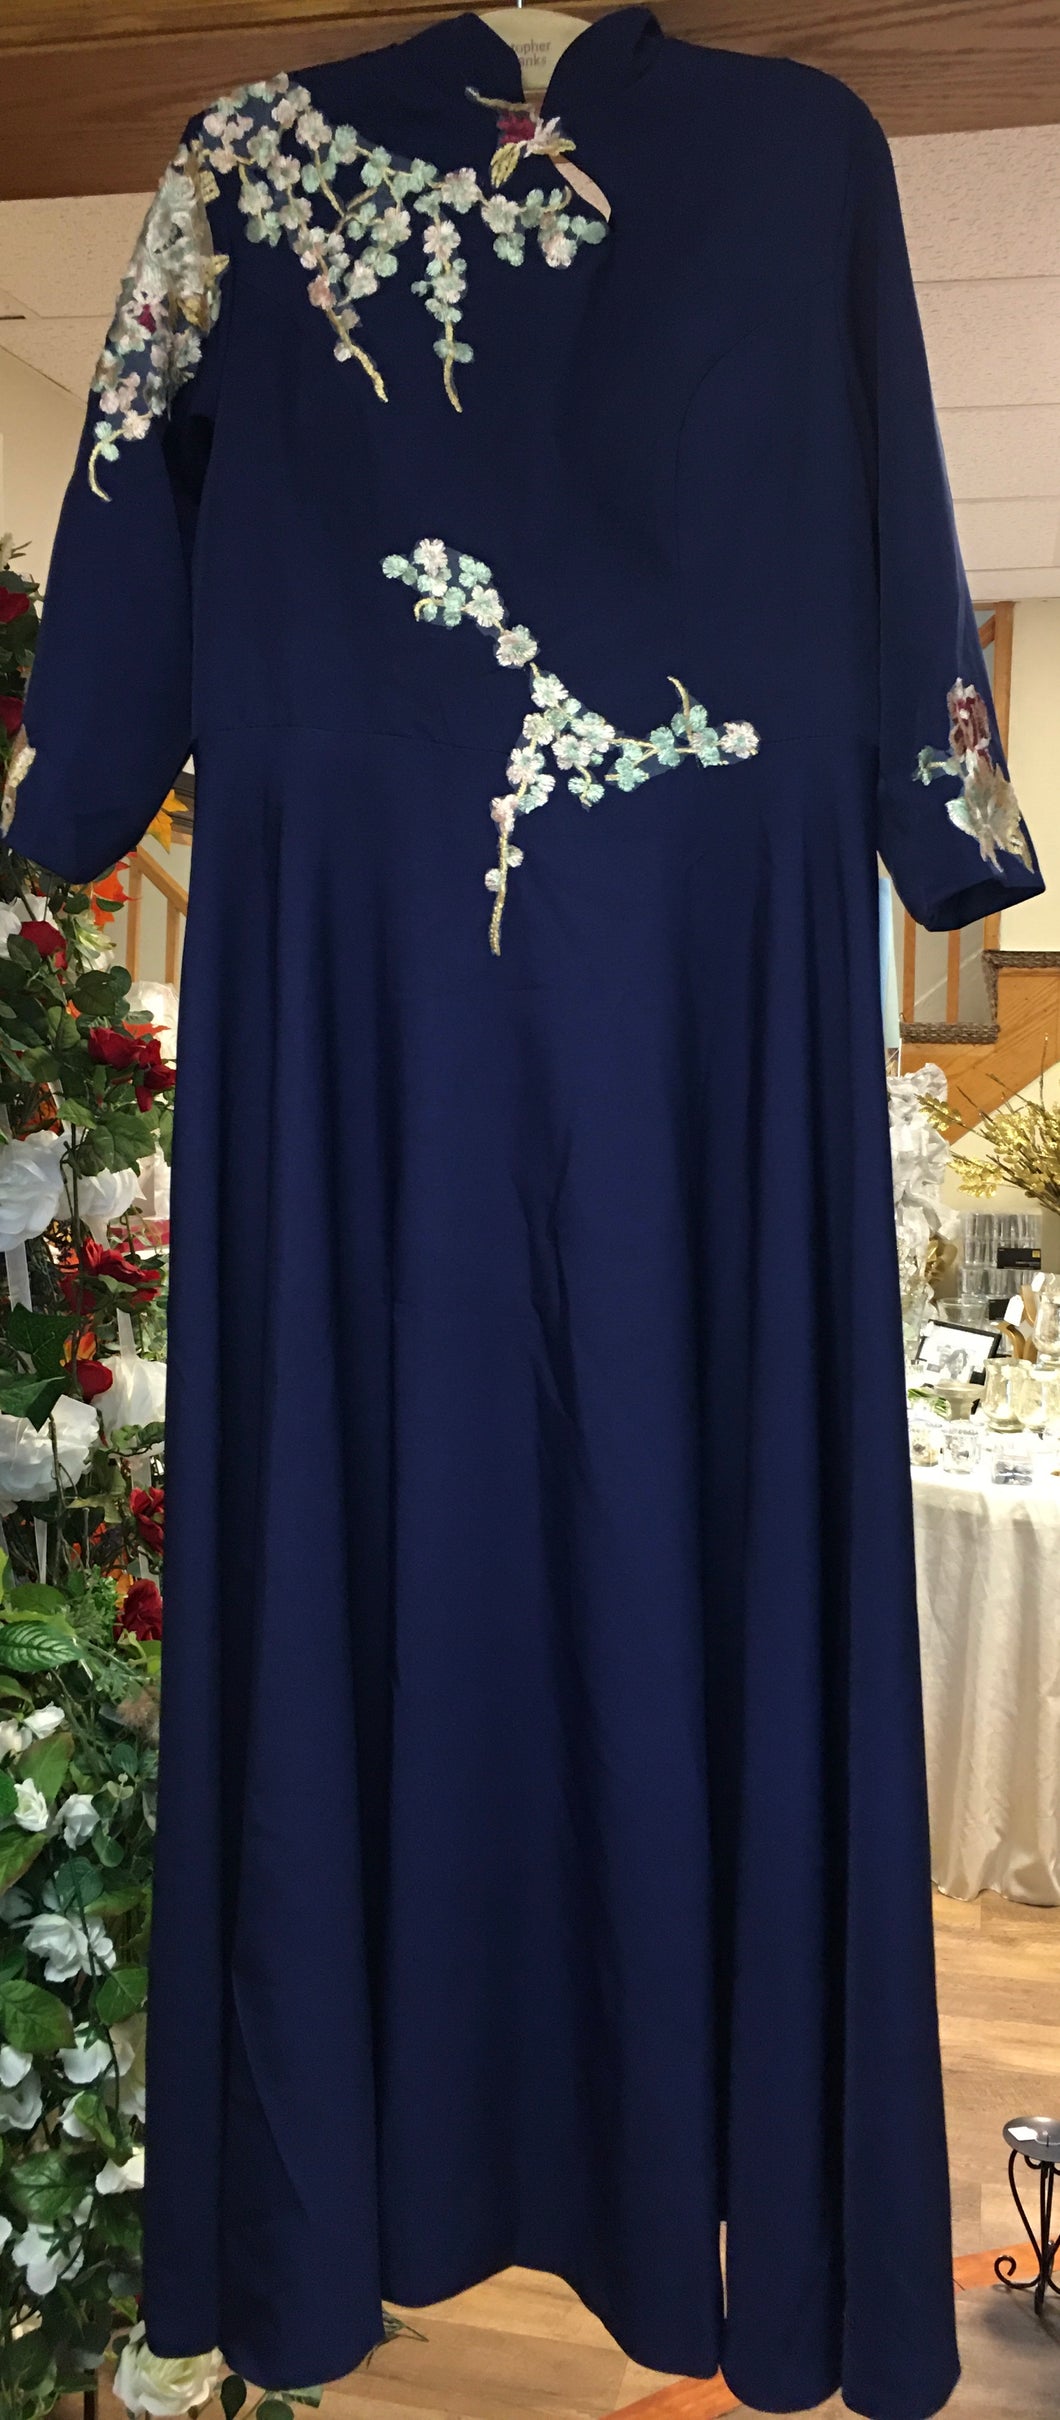 MEDL100-A Navy Asian Inspired Gown, Size 18W. New.